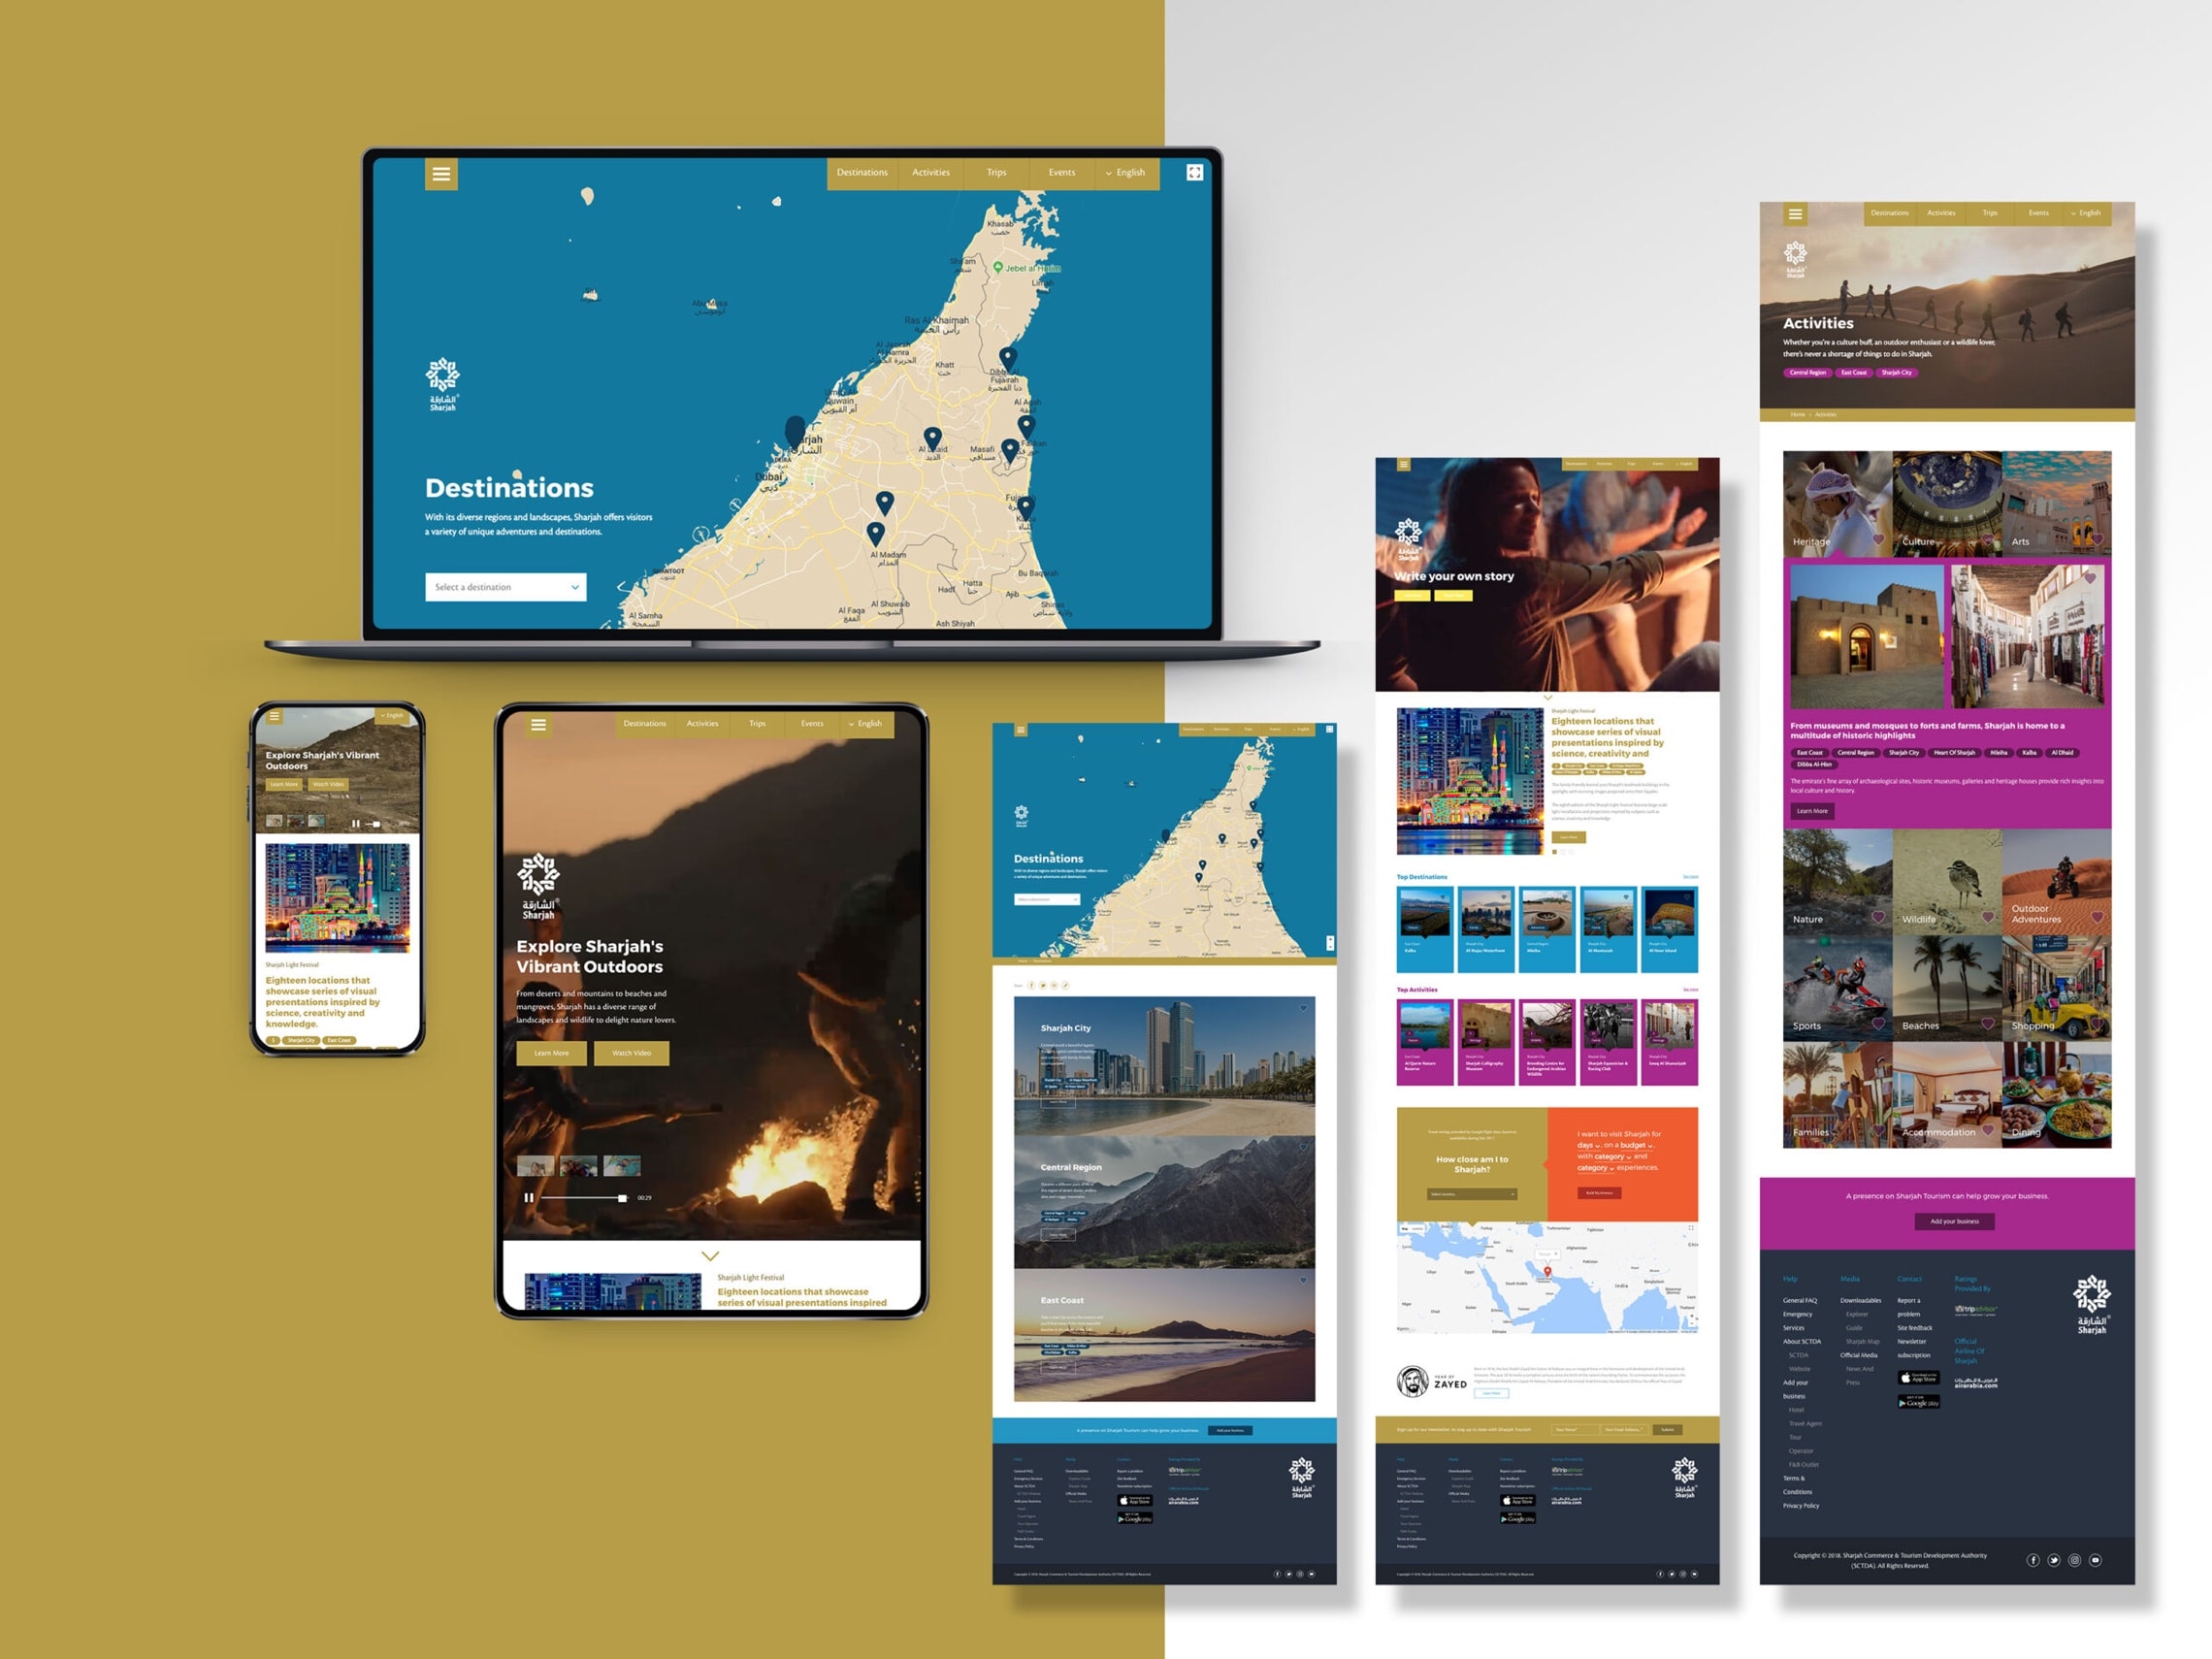 Examples of different web pages designed and developed for The Sharjah Commerce and Tourism Development Authority (SCTDA)